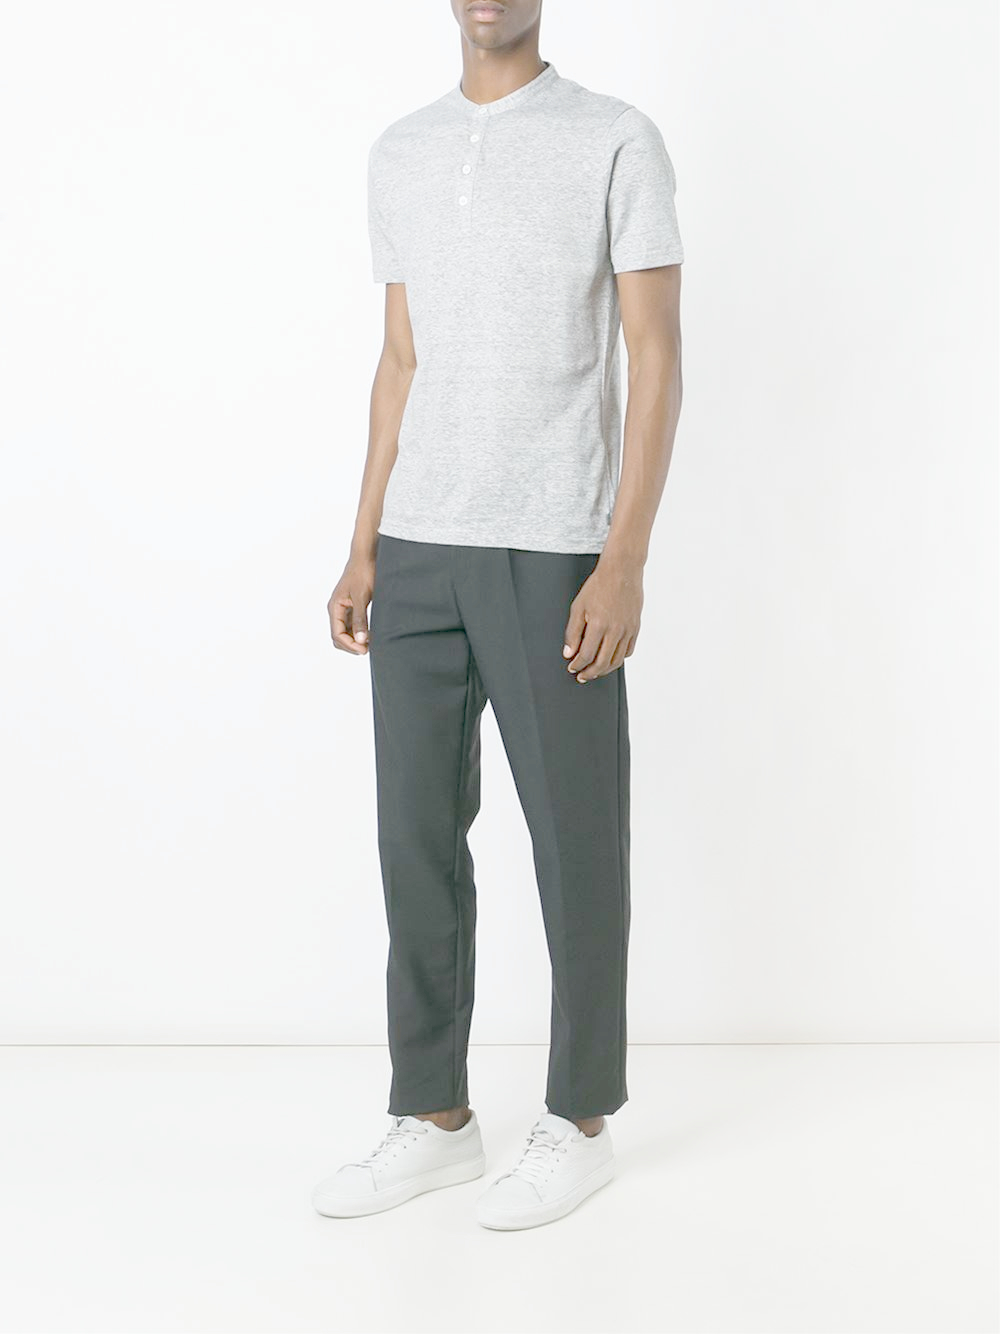 Lyst - Eleventy Collarless Polo Shirt in Gray for Men